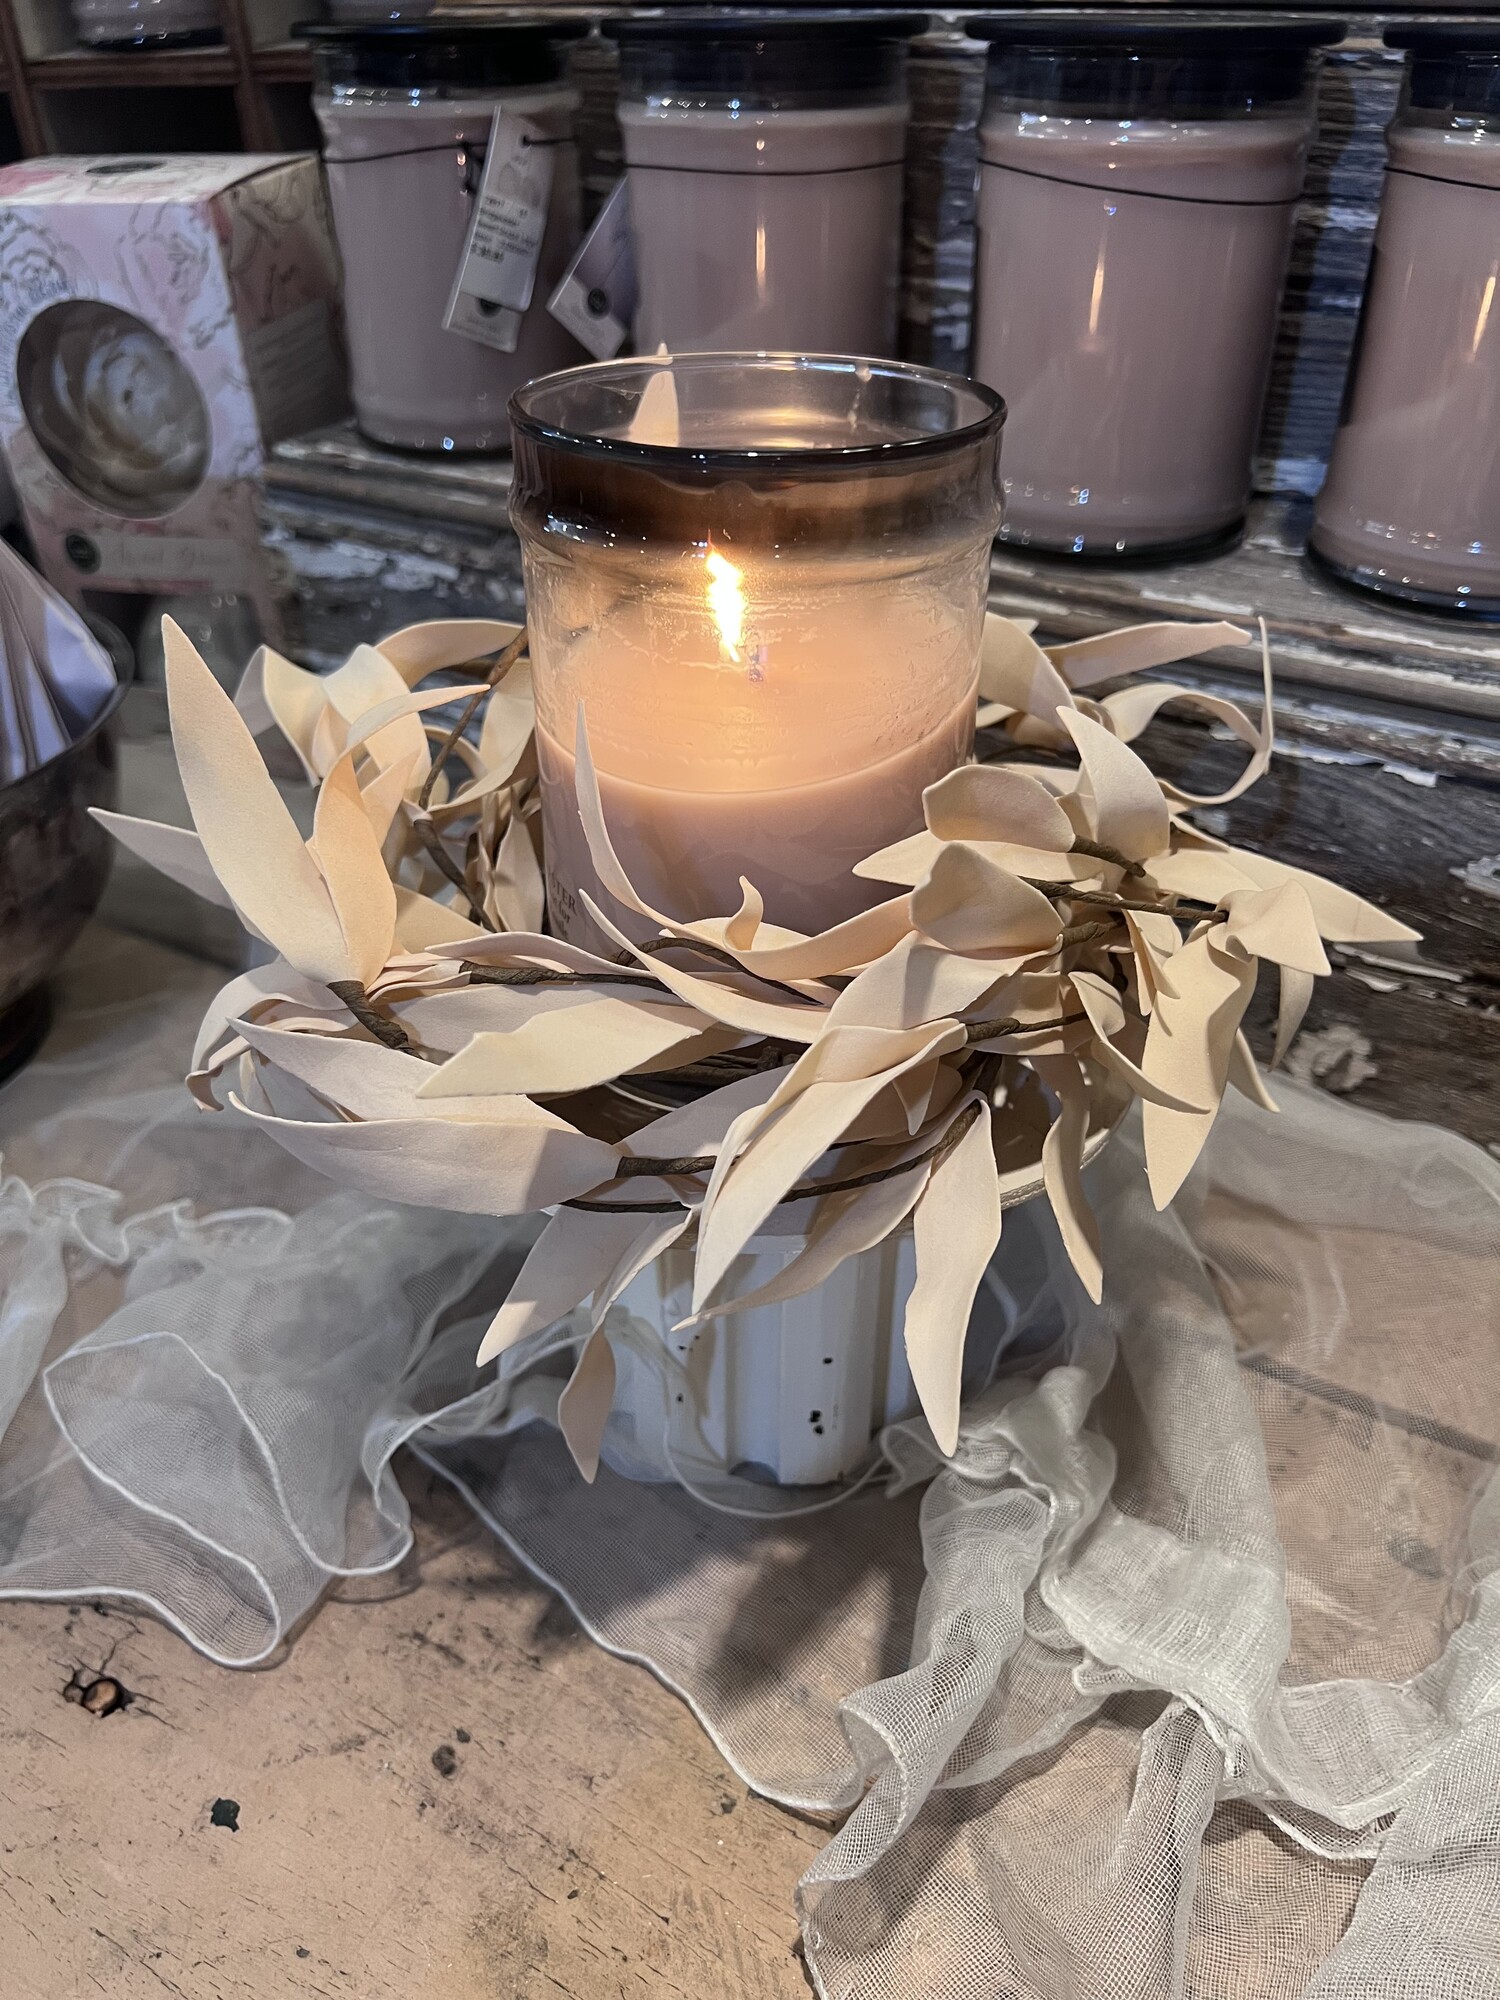 This Biege Leaves candle ring has soft foam leaves in a pretty shade of beige and would look great with any decor. It has a brown paper wrapped inner ring that is 4 inches in diameter and has an outter diameter of 10inches but can be fanned out further. This candle ring perfect for your favorite candle, we love it with our large Sweet Grace candle.